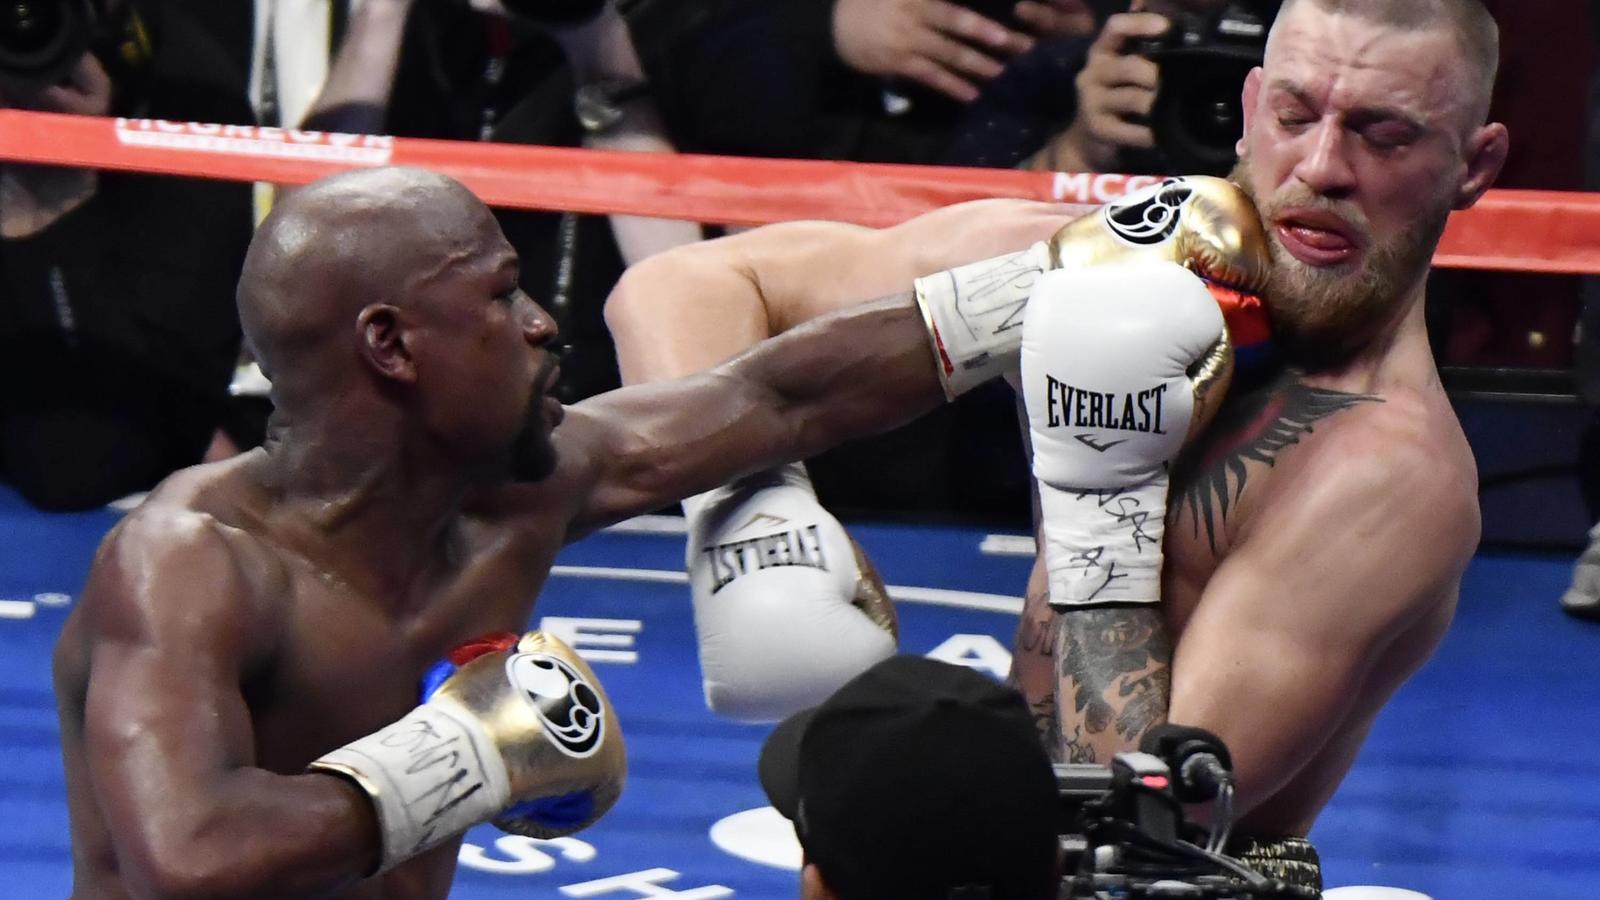 Aug 26,2017. Las Vegas NV. ( IN blk-gld trunks) Floyd Mayweather Jr.goes 10 rounds with Conor McGregor Saturday at the T-Mobile arena in Las Vegas. Floyd Mayweather Jr. took the win by TKO as the fight was stop in the 10th round. This was Floyd s las